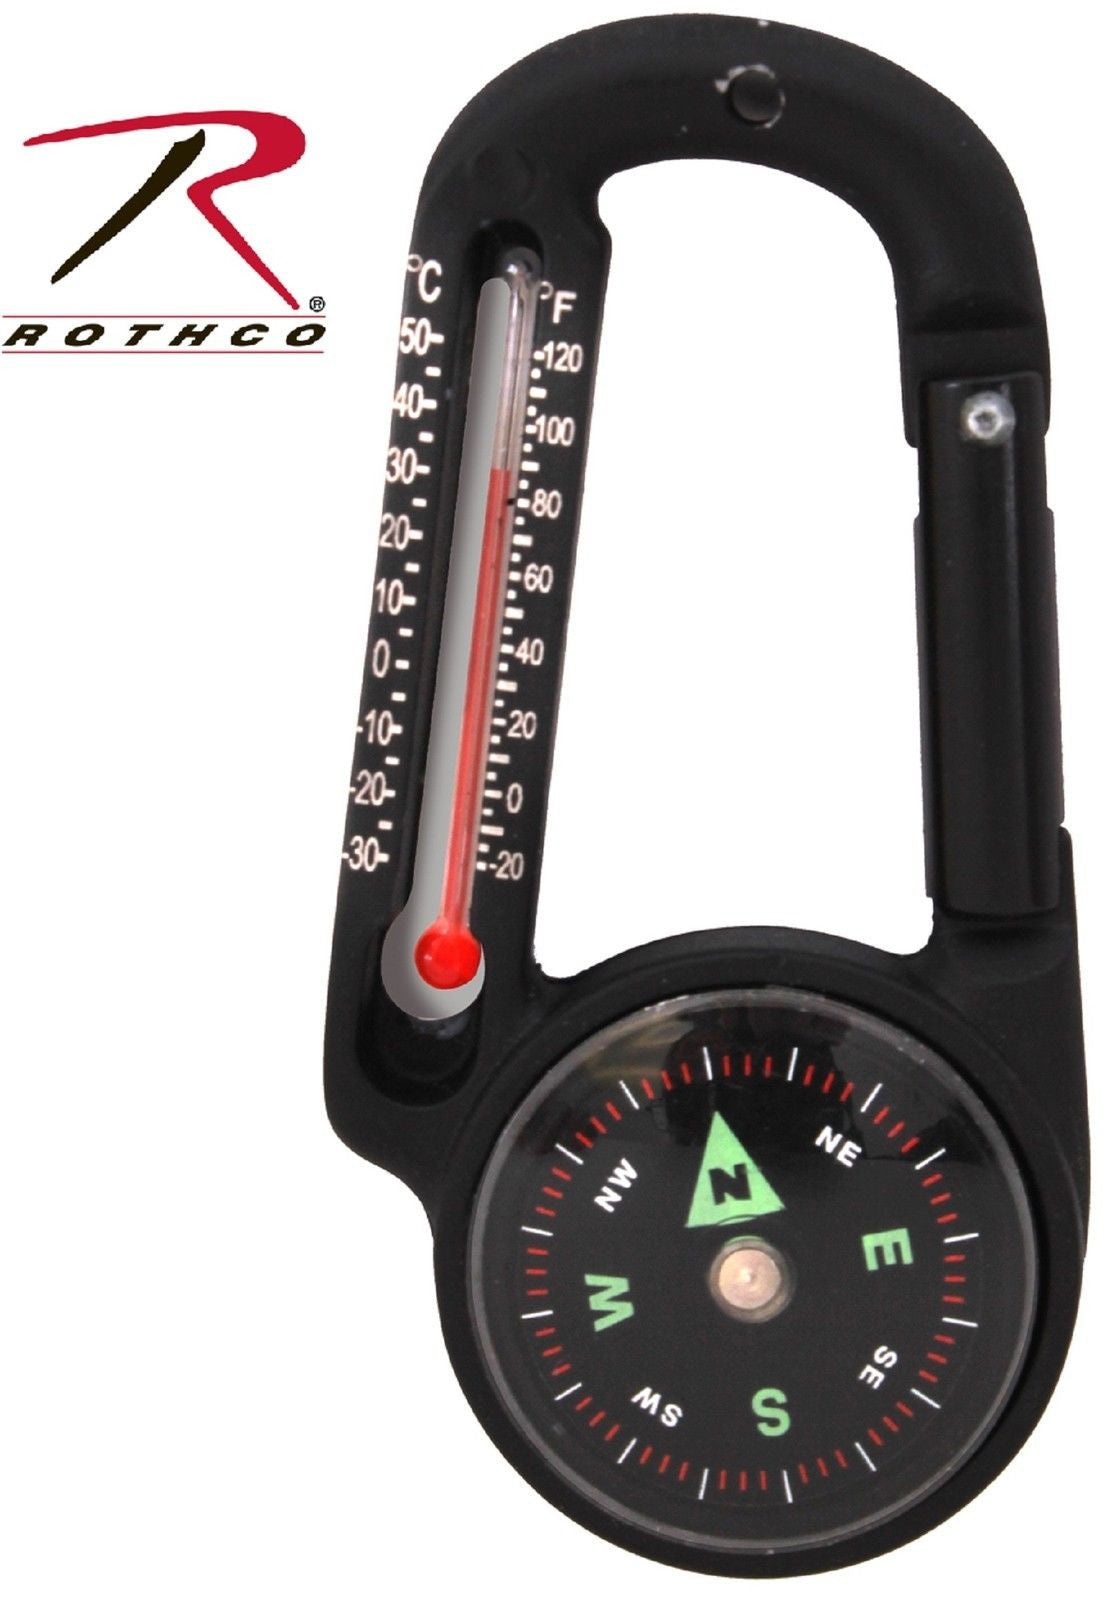 Rothco Carabiner Compass & Thermometer Outdoor Survival Tool 6500